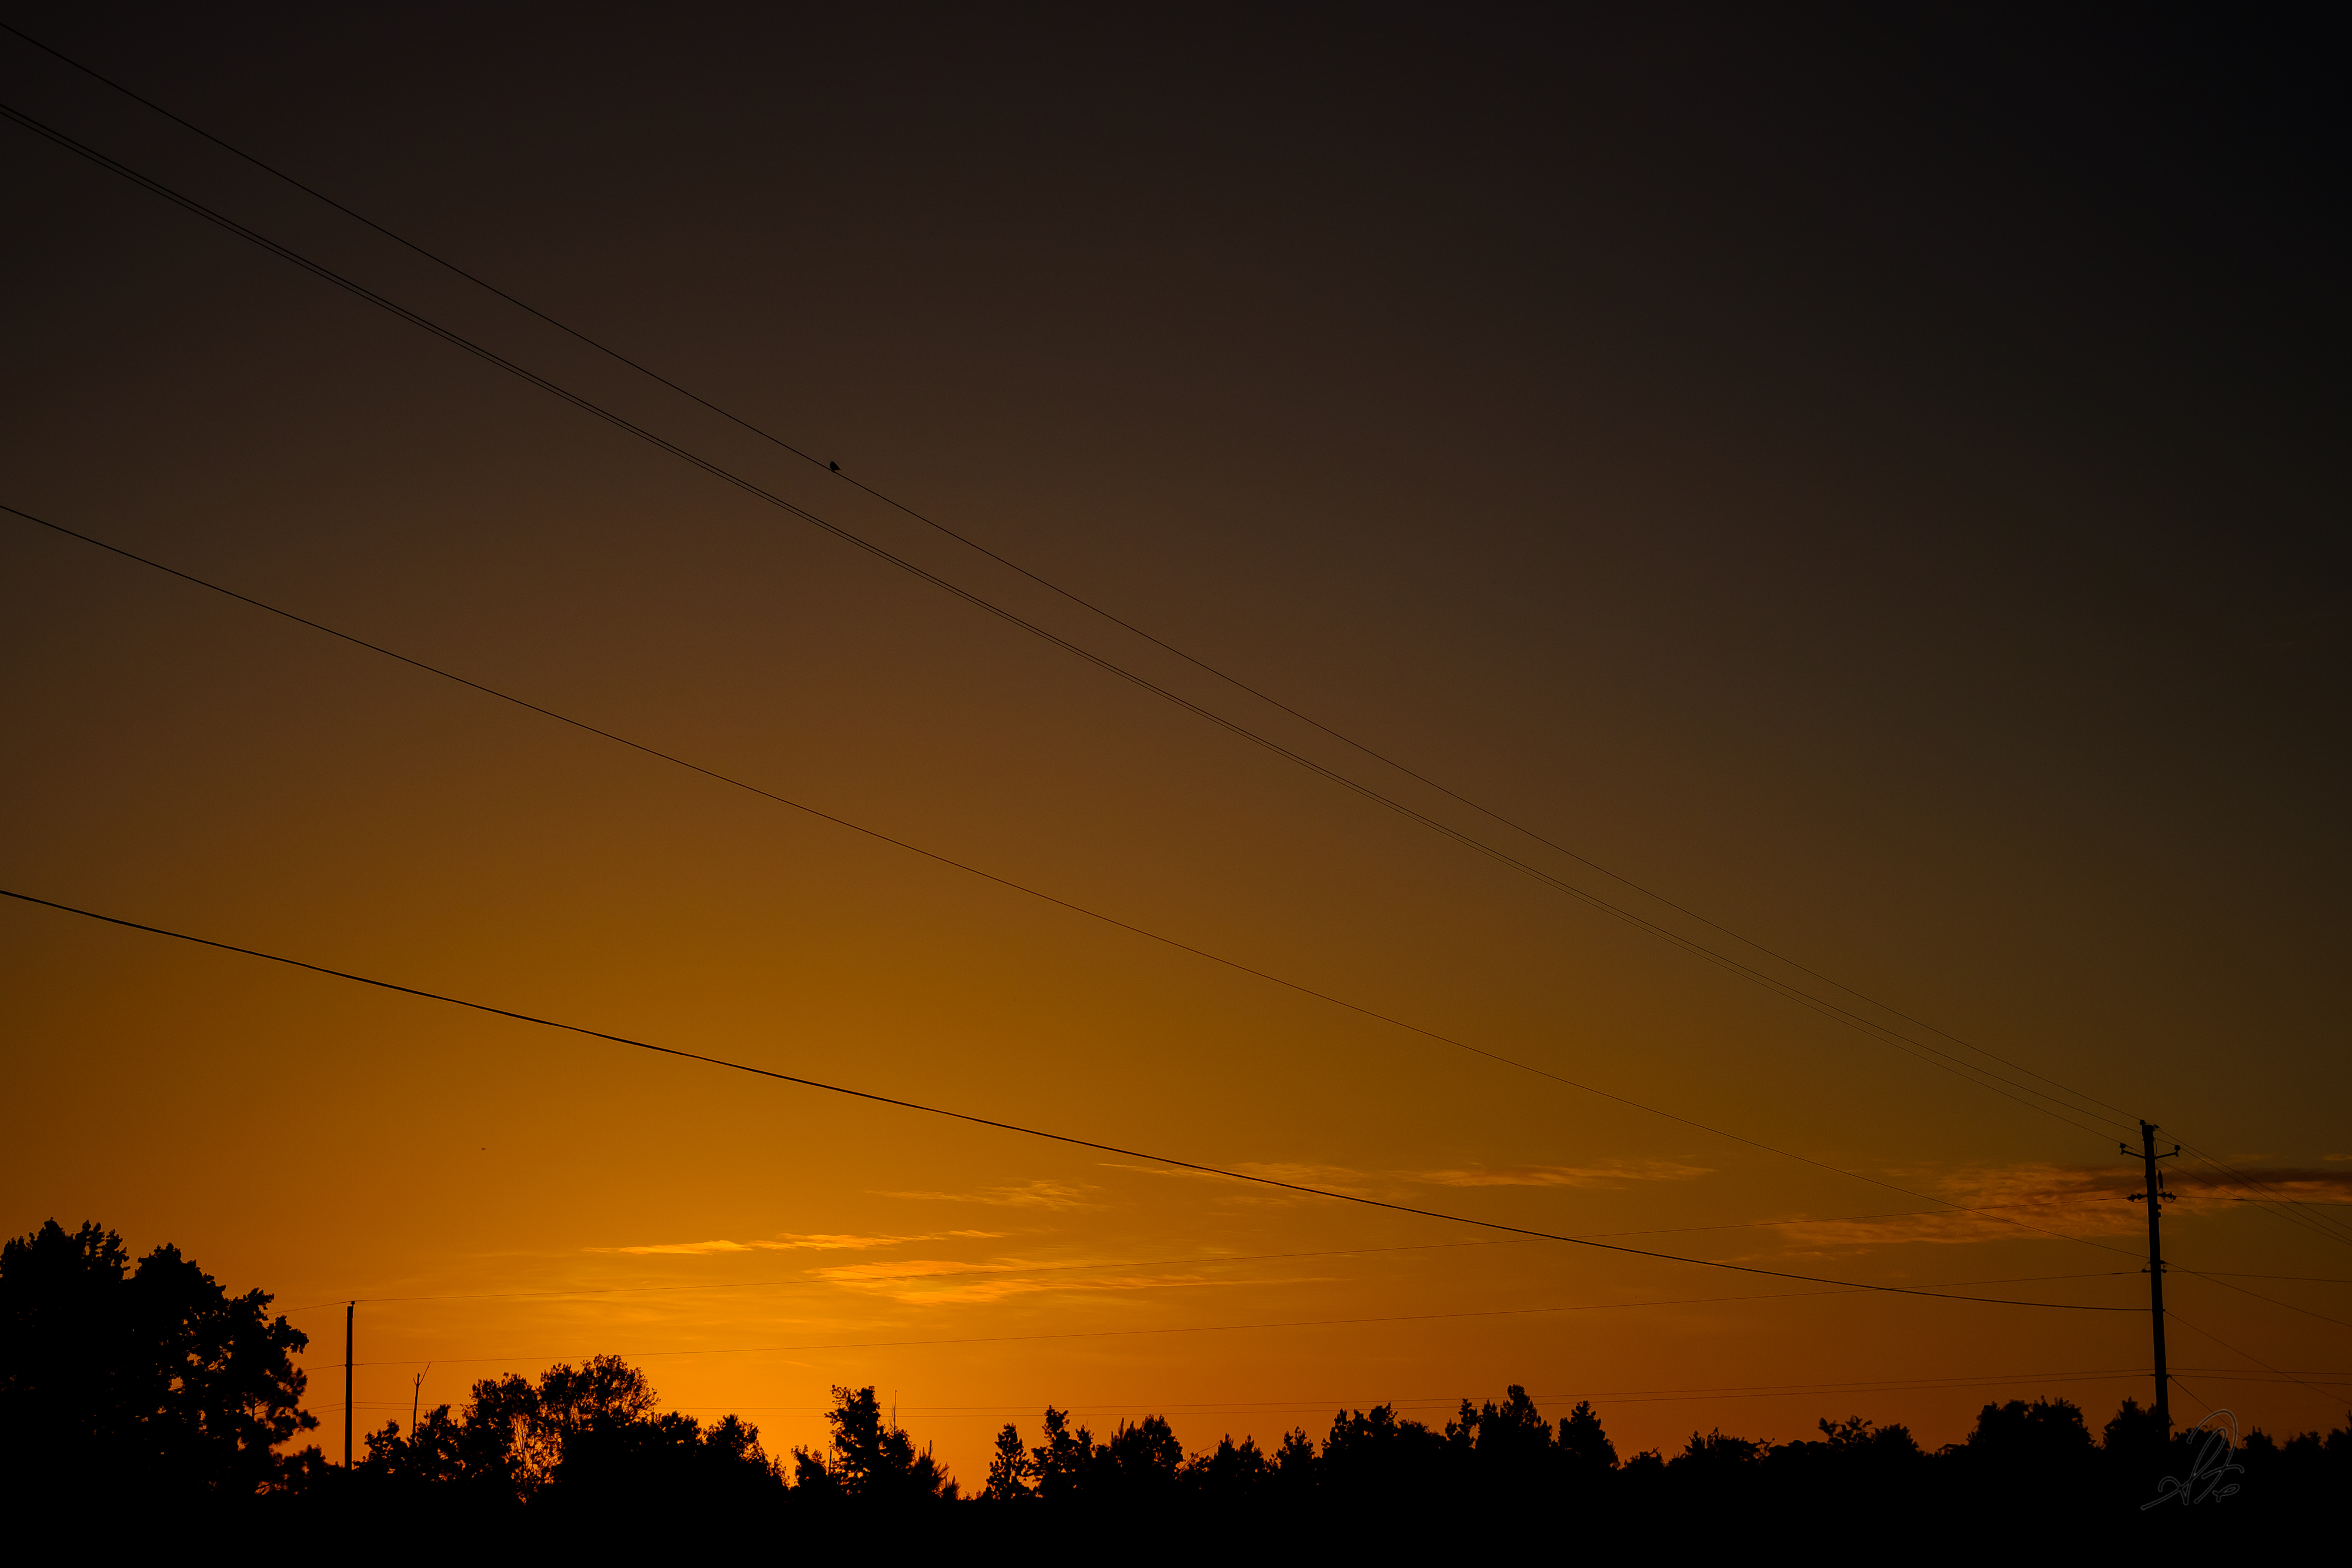 Don’t Include Power Lines in Your Photography